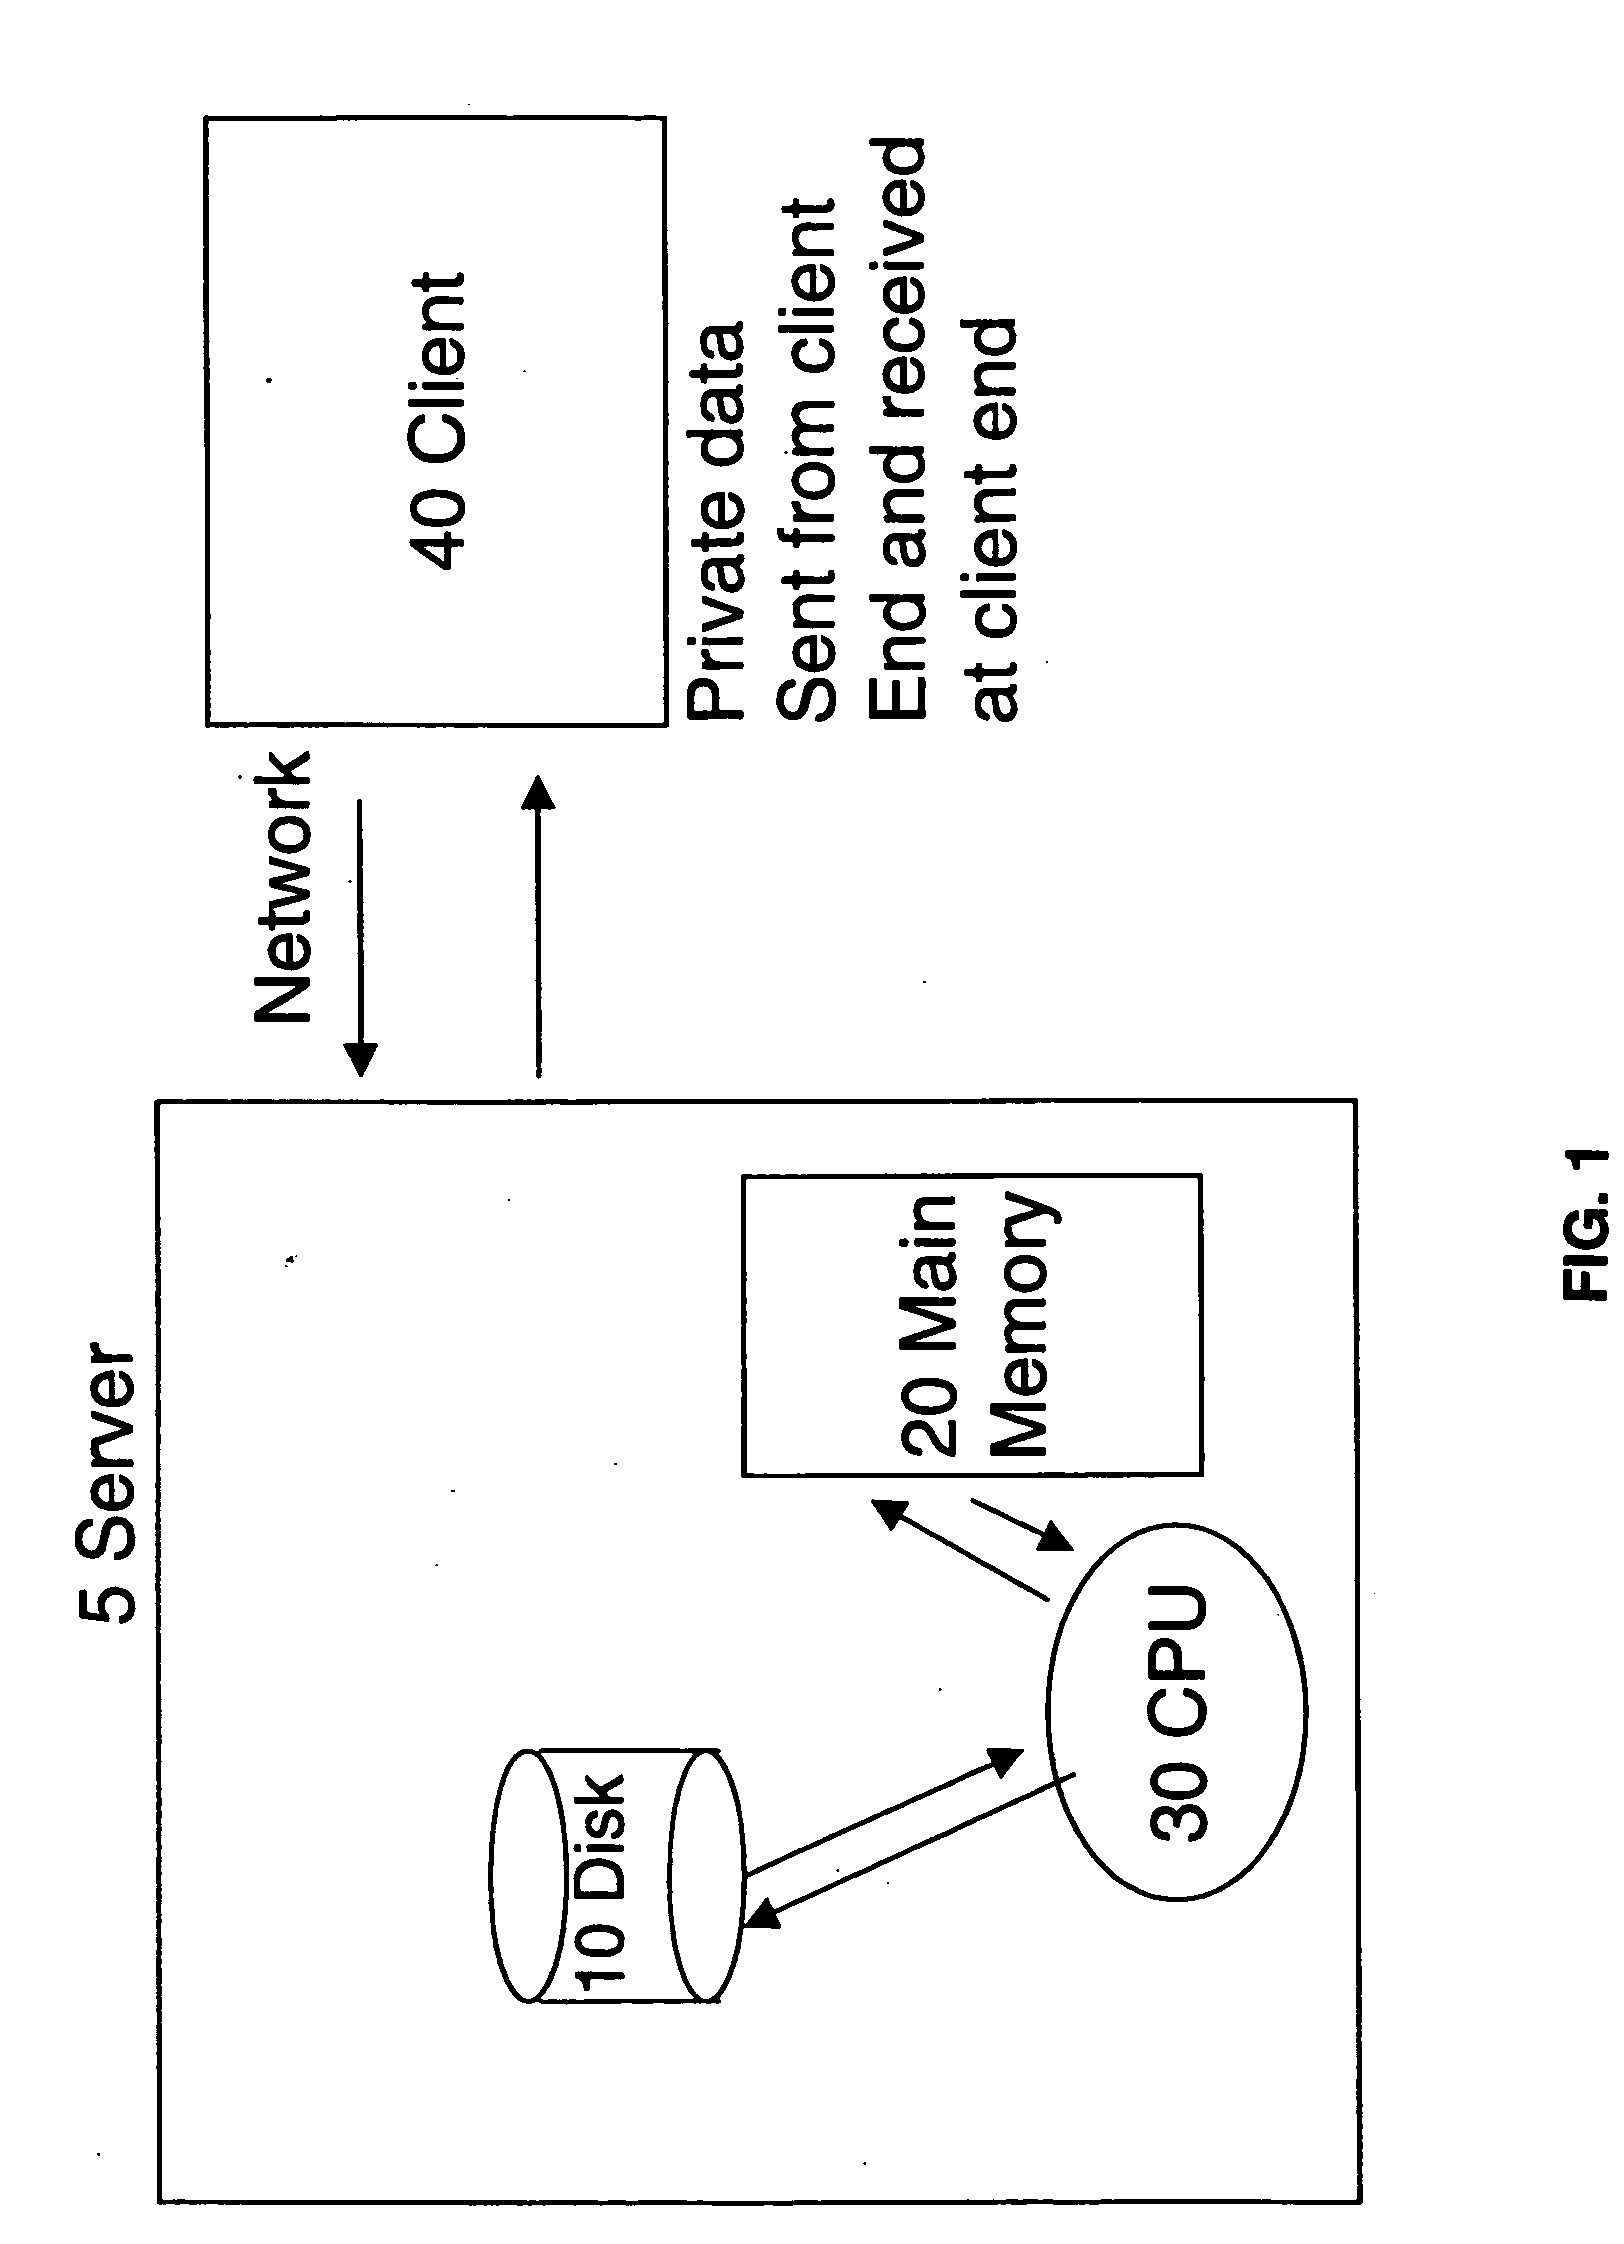 Systems and methods for condensation-based privacy in strings